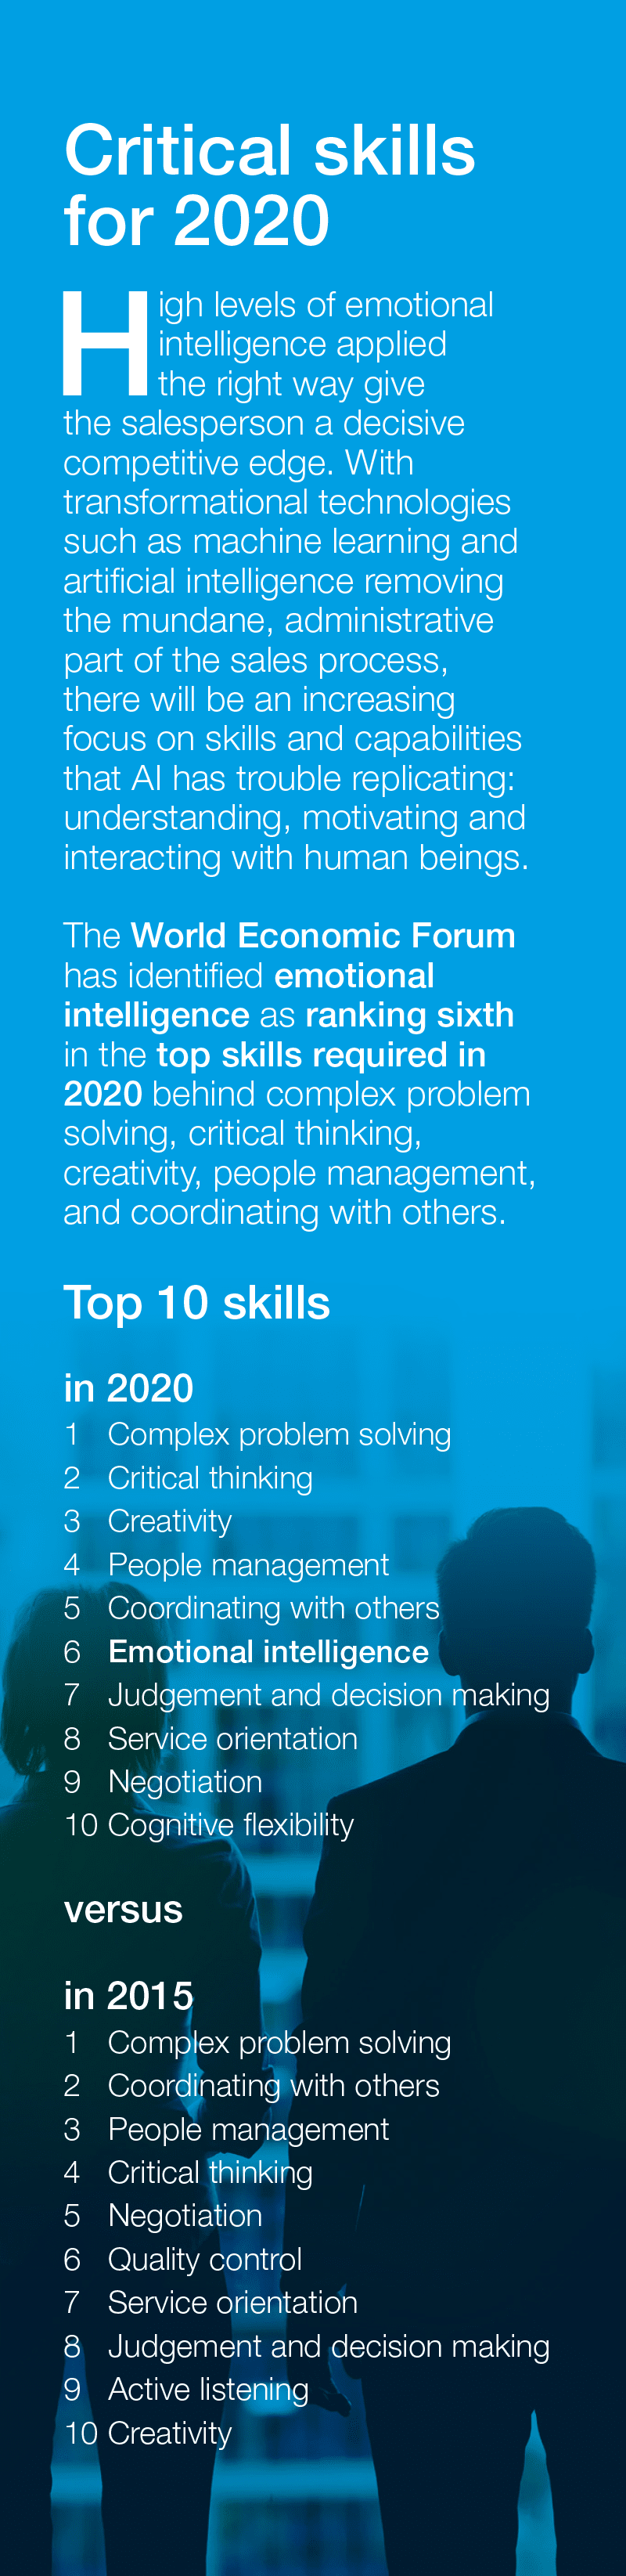 Critical skills for 2020